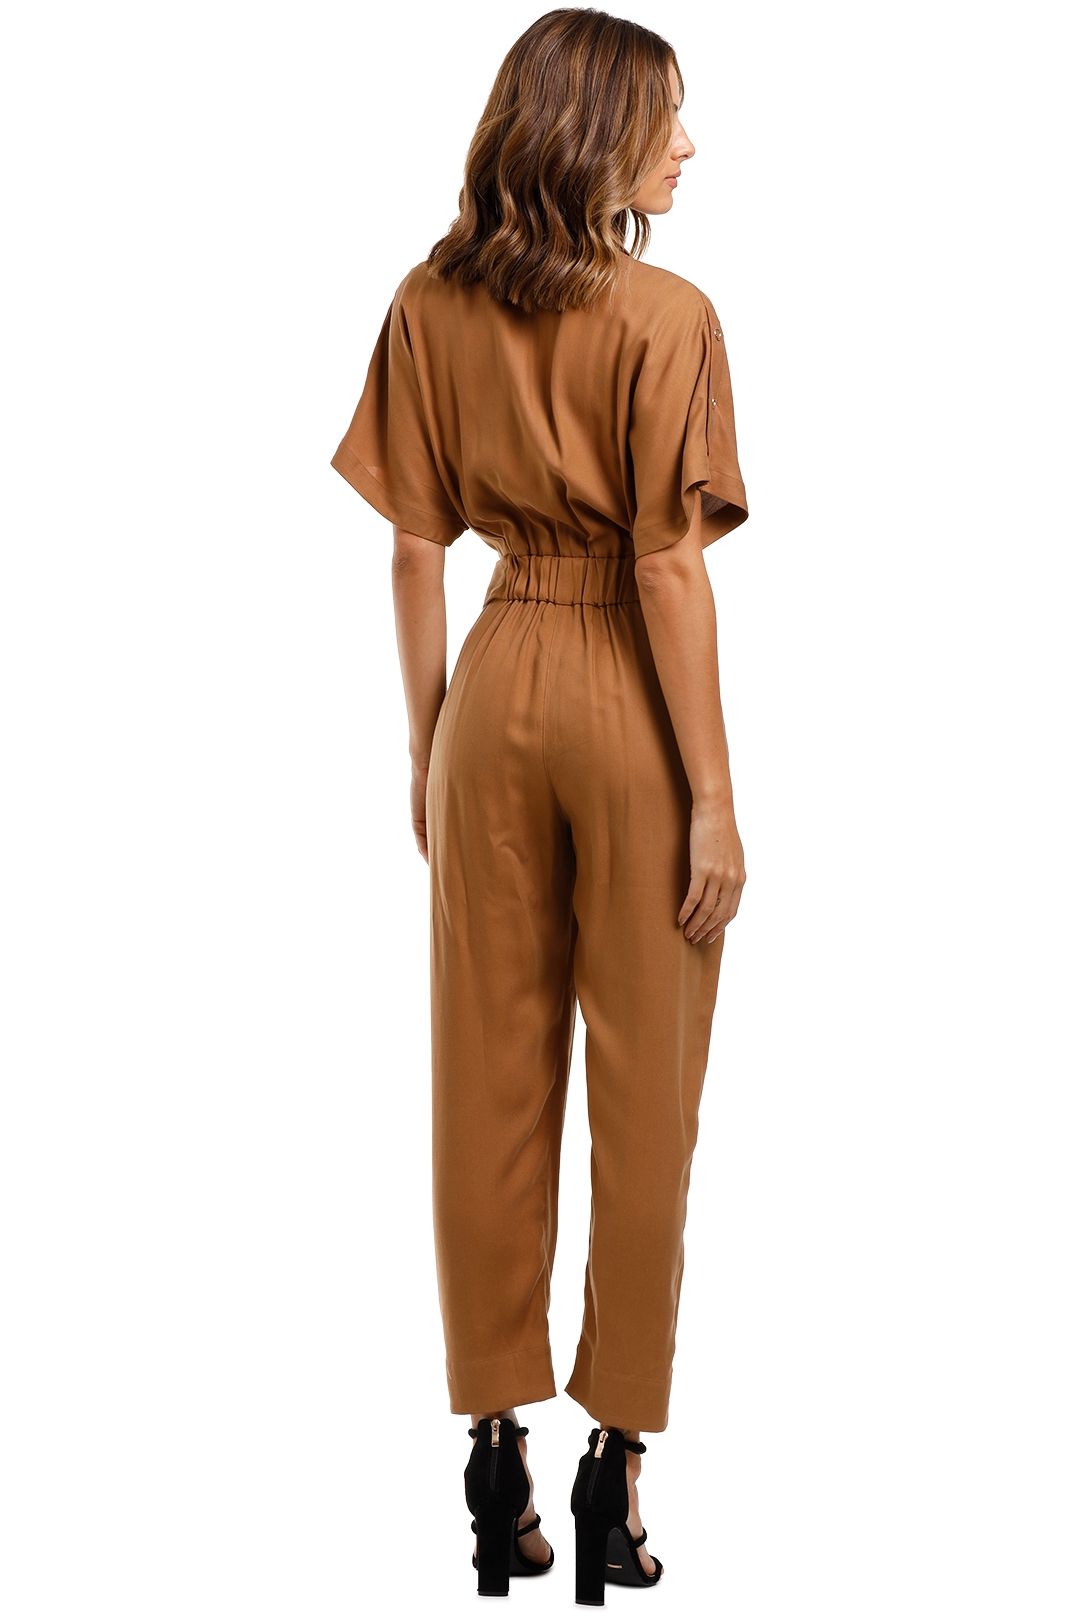 Ginger and Smart Cruiser Jumpsuit